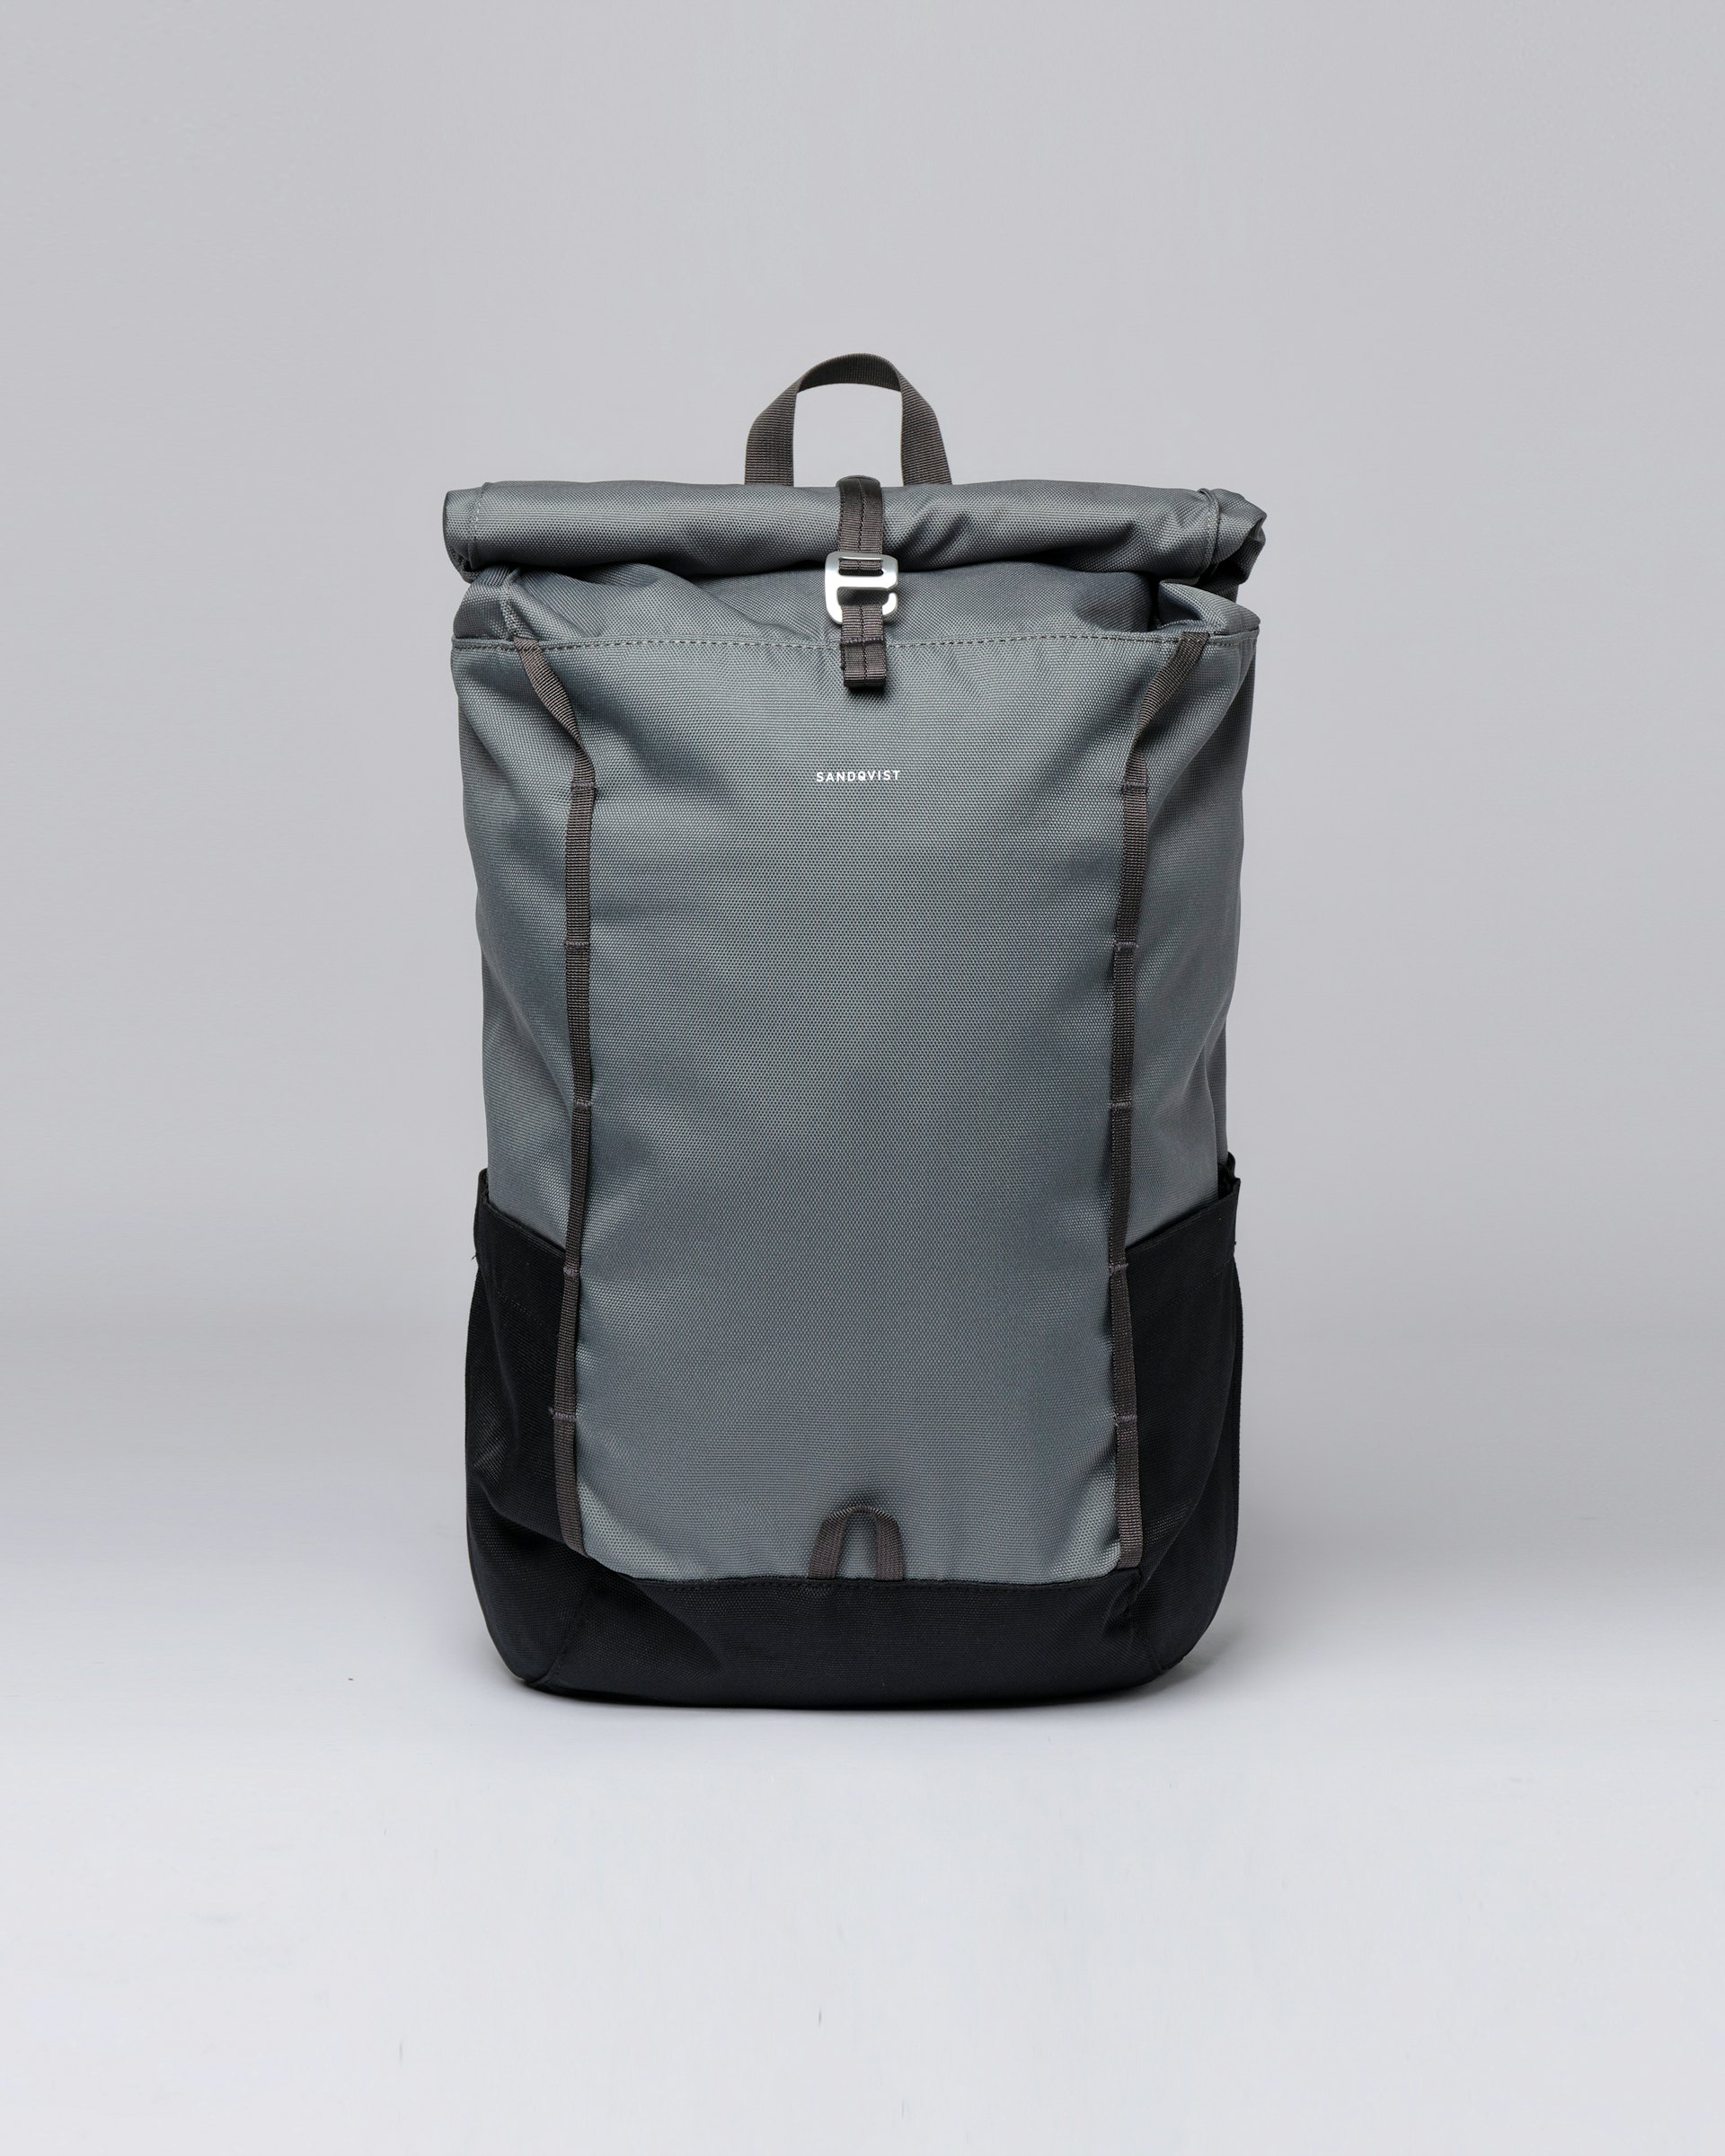 Arvid belongs to the category Backpacks and is in color night grey & black (1 of 5)